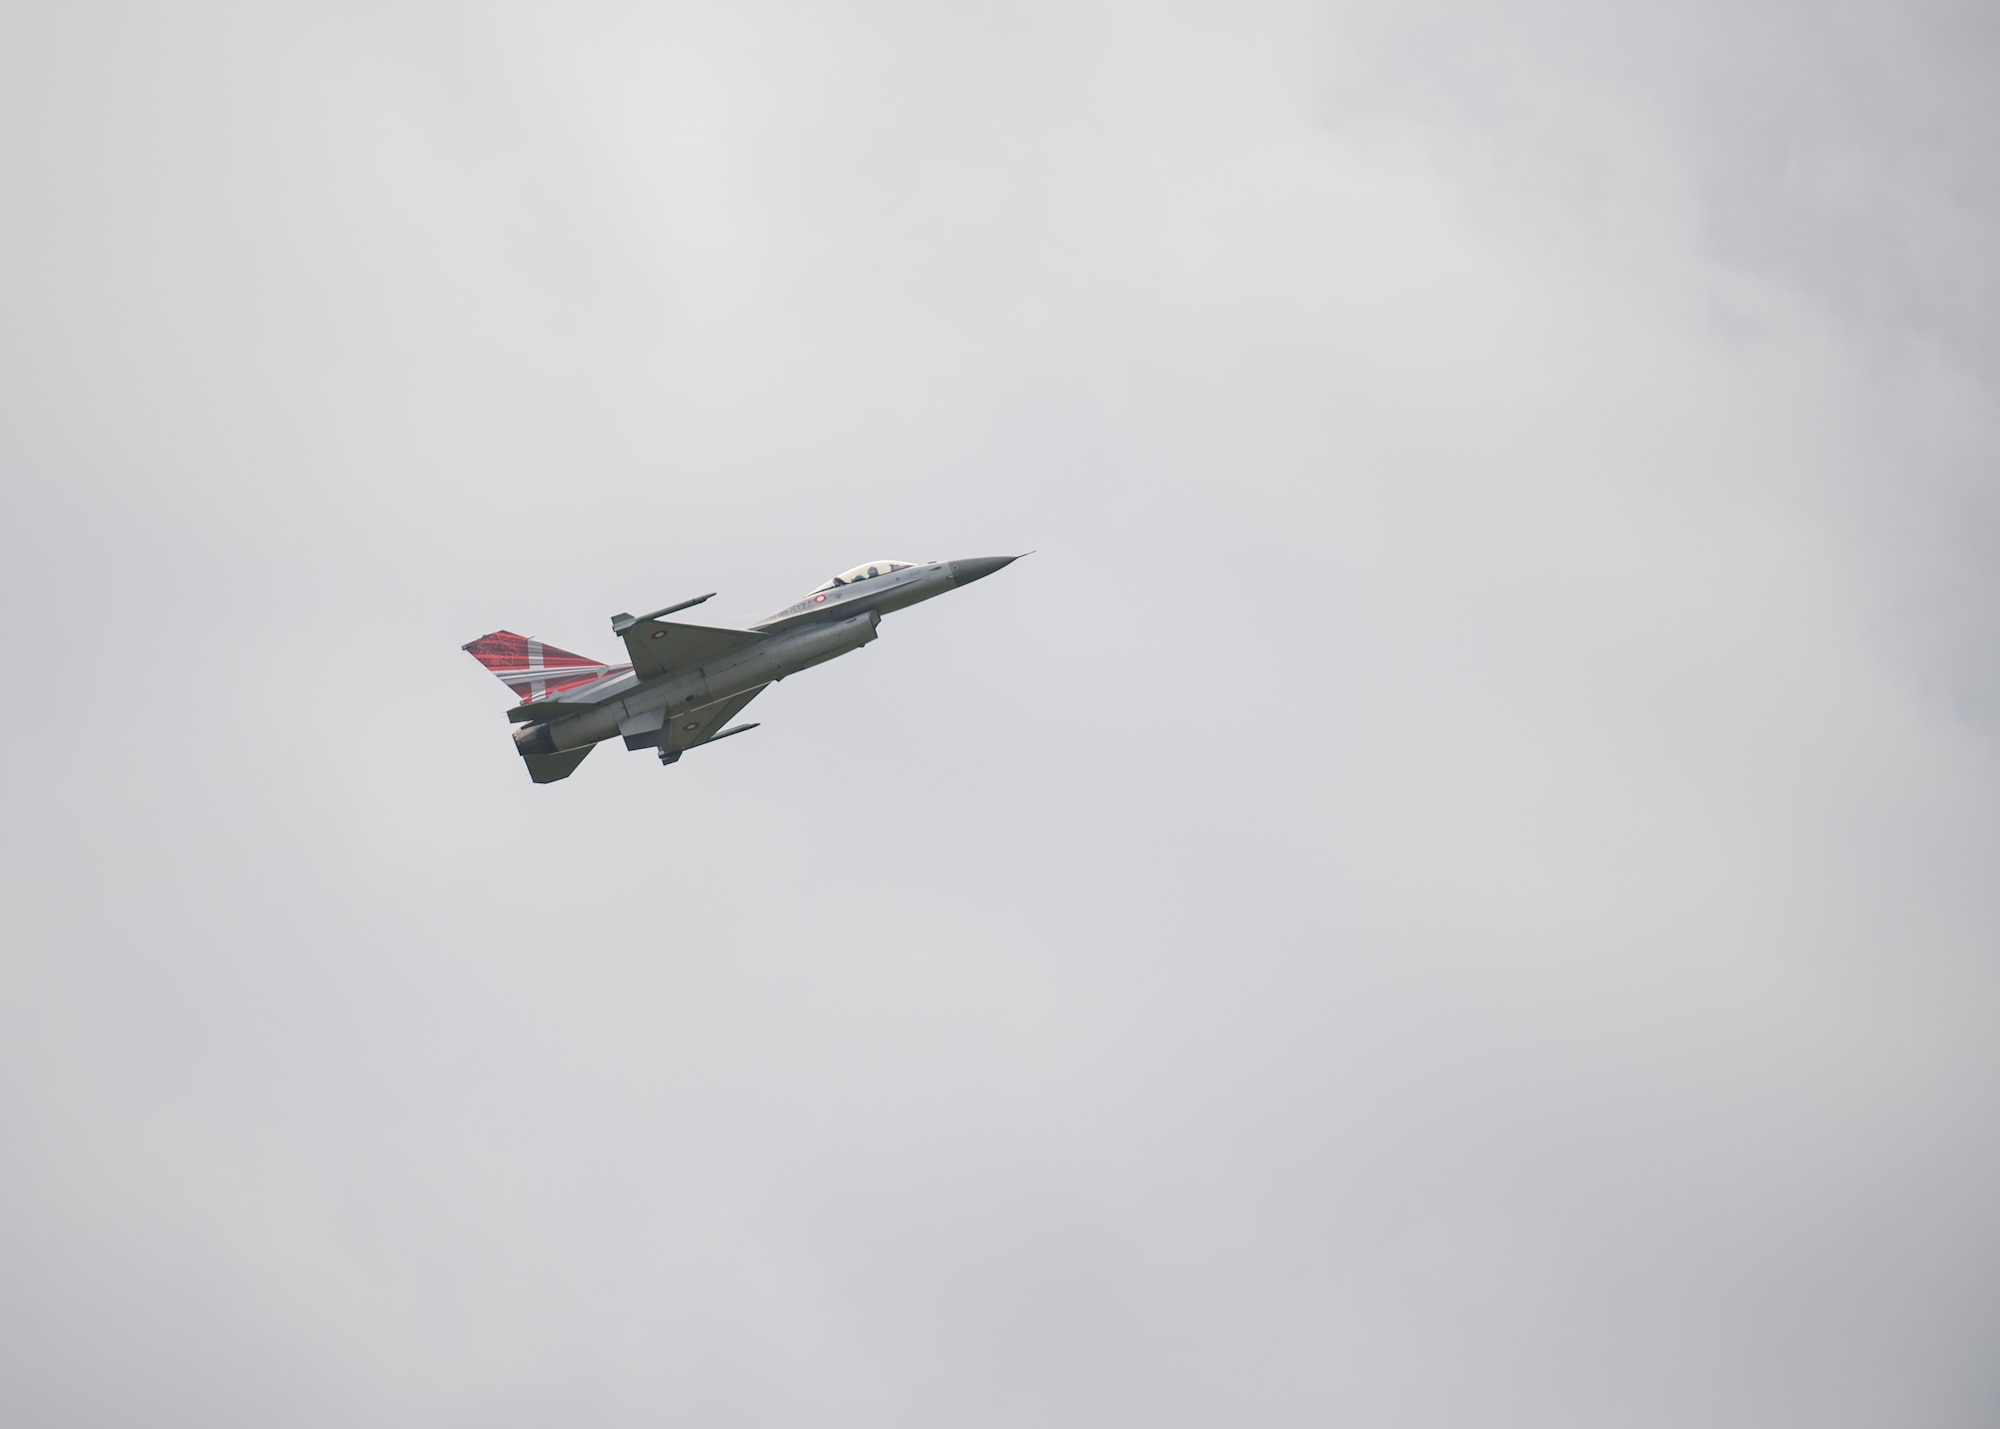 A Royal Danish Air Force F-16C Fighting Falcon flies above Ostrava Air Base, Czech Republic, during NATO Days. NATO Days is a Czech Republic-led air show and exhibition that showcases military ground and aviation capabilities from 19 nations. Participation in NATO Days increases our understanding of European ally and partner capabilities, greatly enhancing our ability to operate together as a team. (U.S. Navy photo by Mass Communication Specialist 2nd Class Robert J. Baldock)